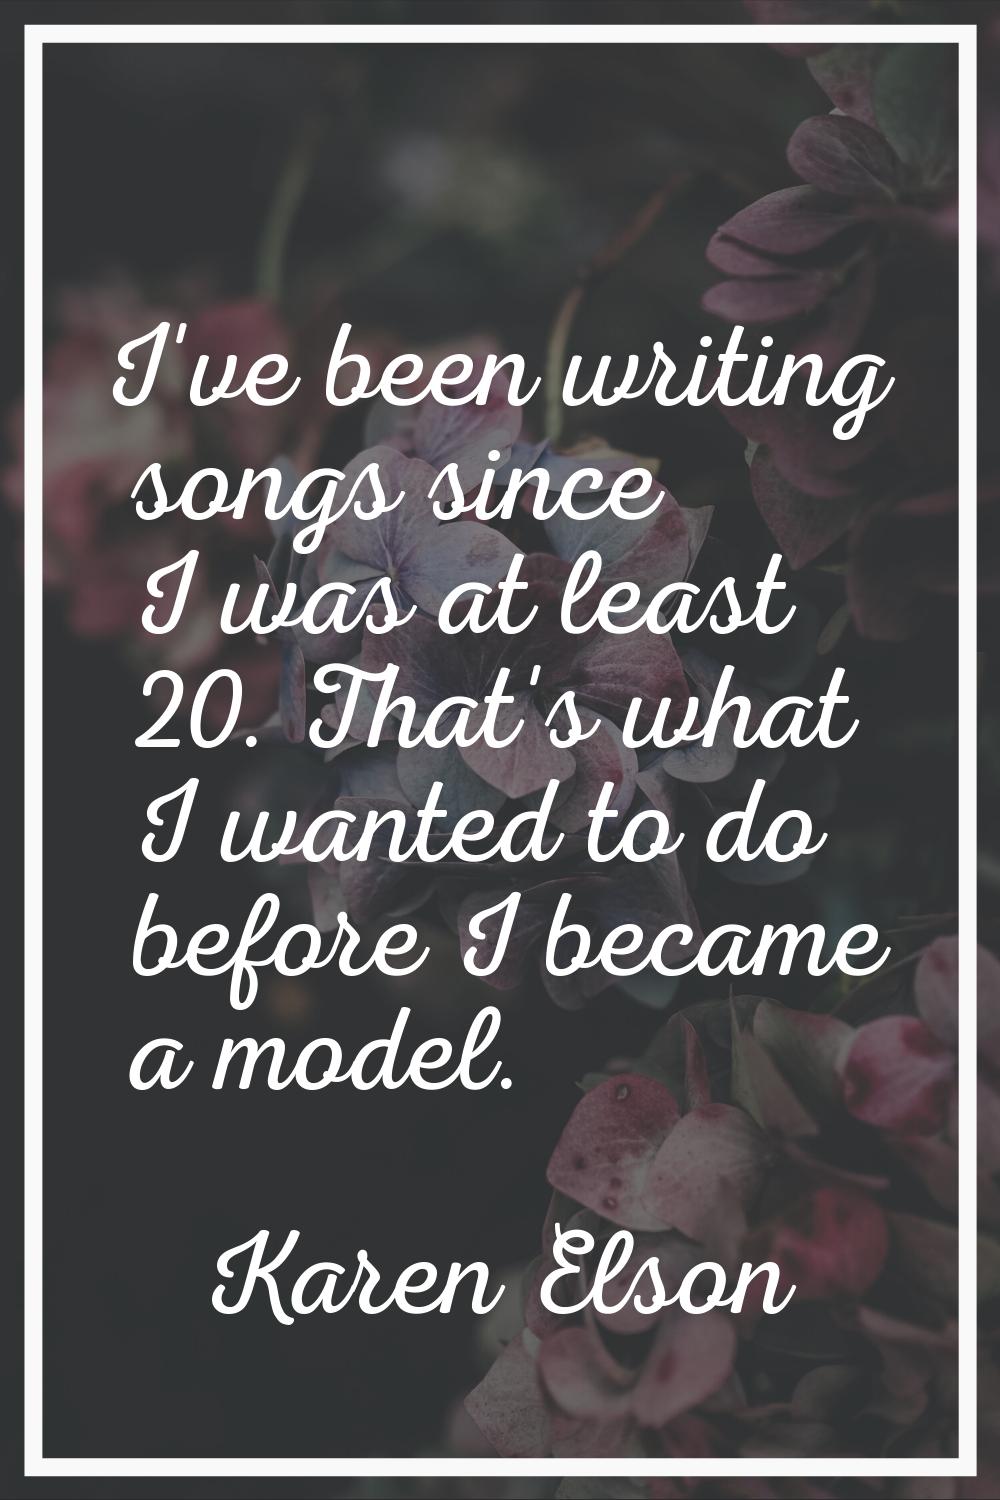 I've been writing songs since I was at least 20. That's what I wanted to do before I became a model